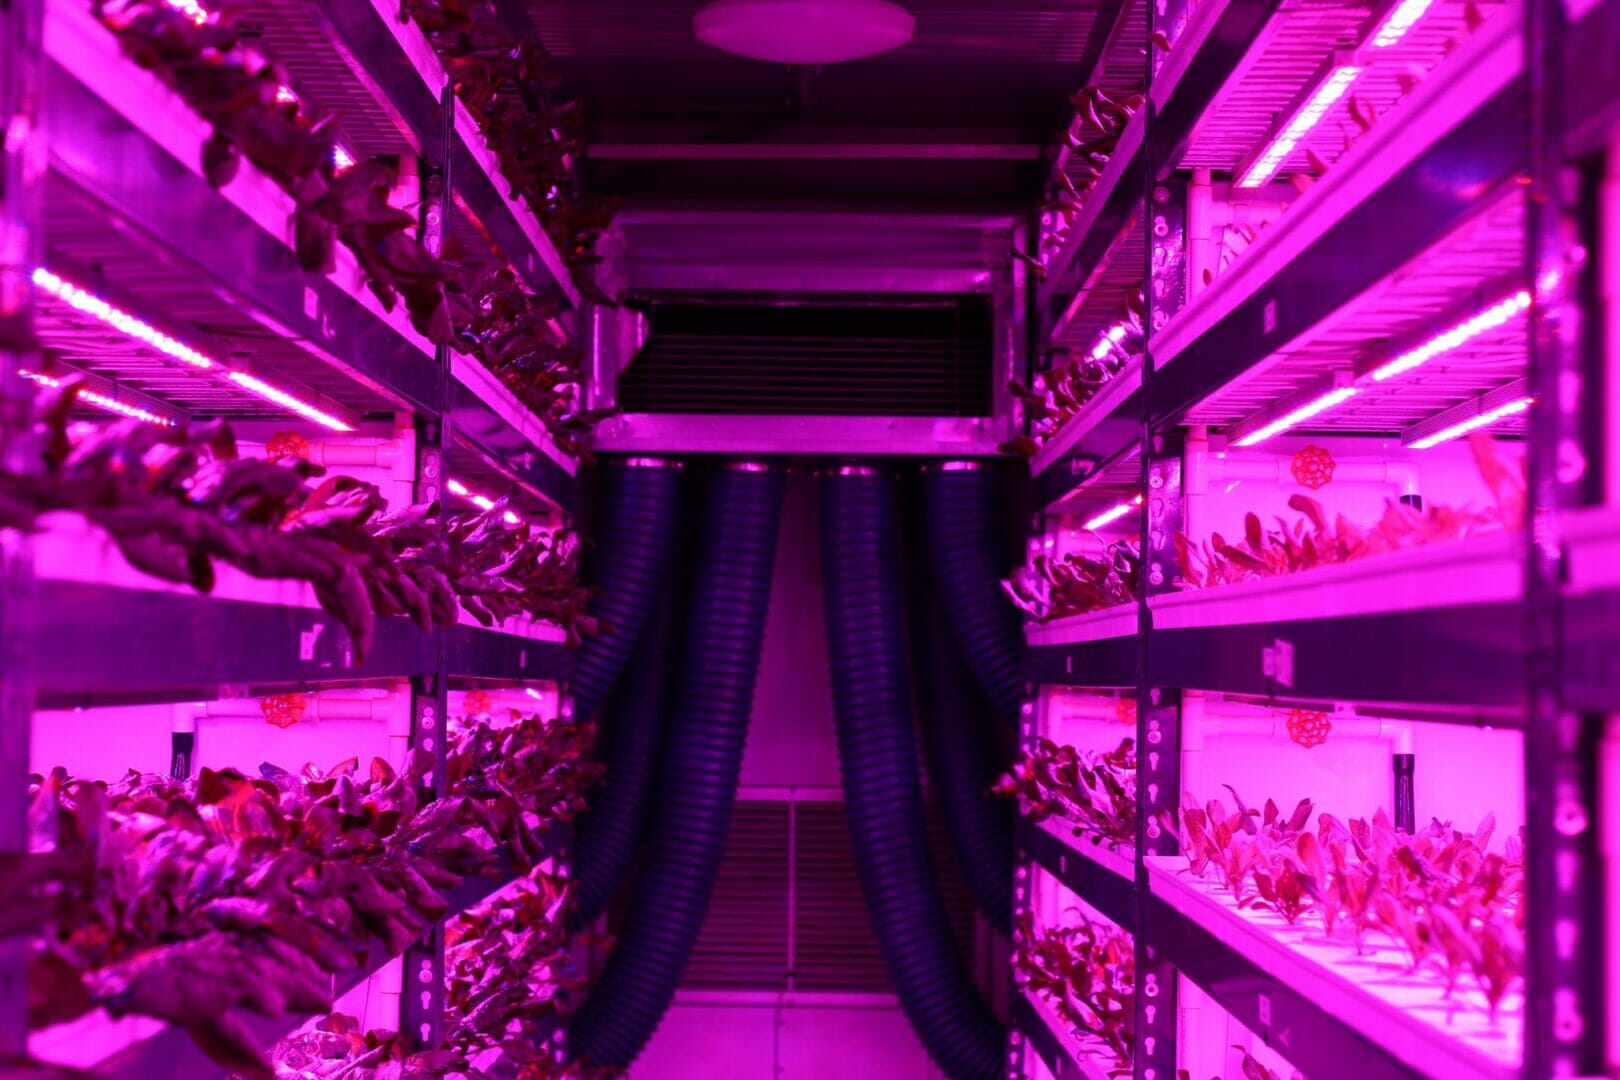 Bradbrook Consulting appointed to design and develop the world’s largest vertical farm